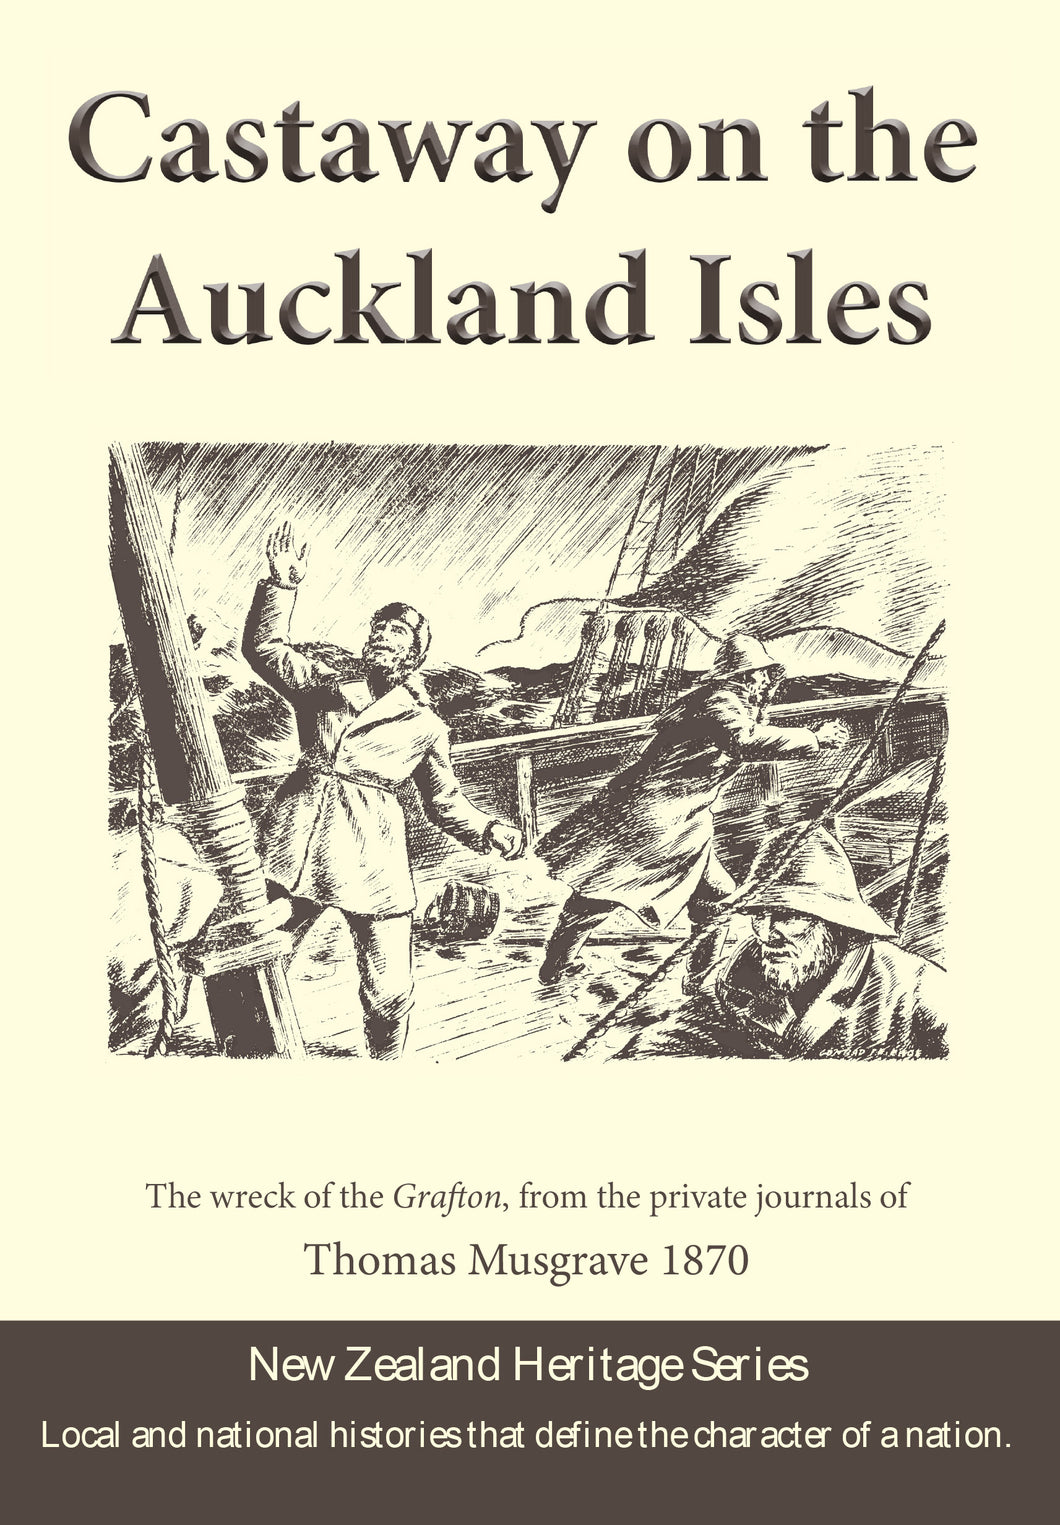 Castaway on the Auckland Isles by Thomas Musgrave